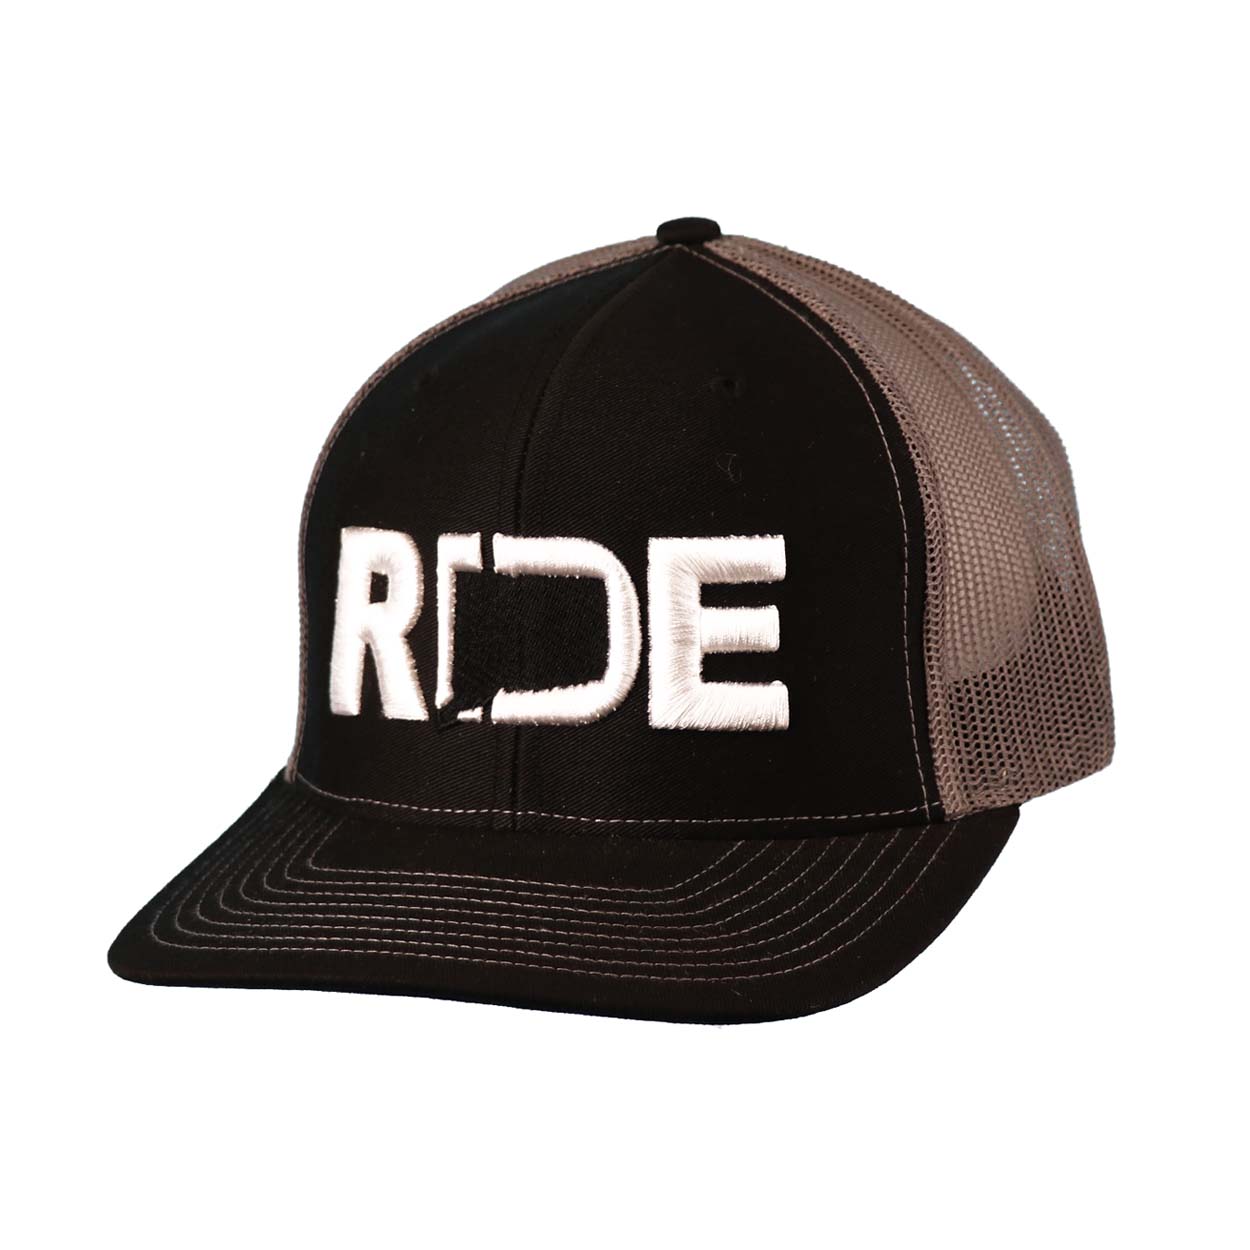 Ride Connecticut Classic Embroidered Snapback Trucker Hat Black/Charcoal